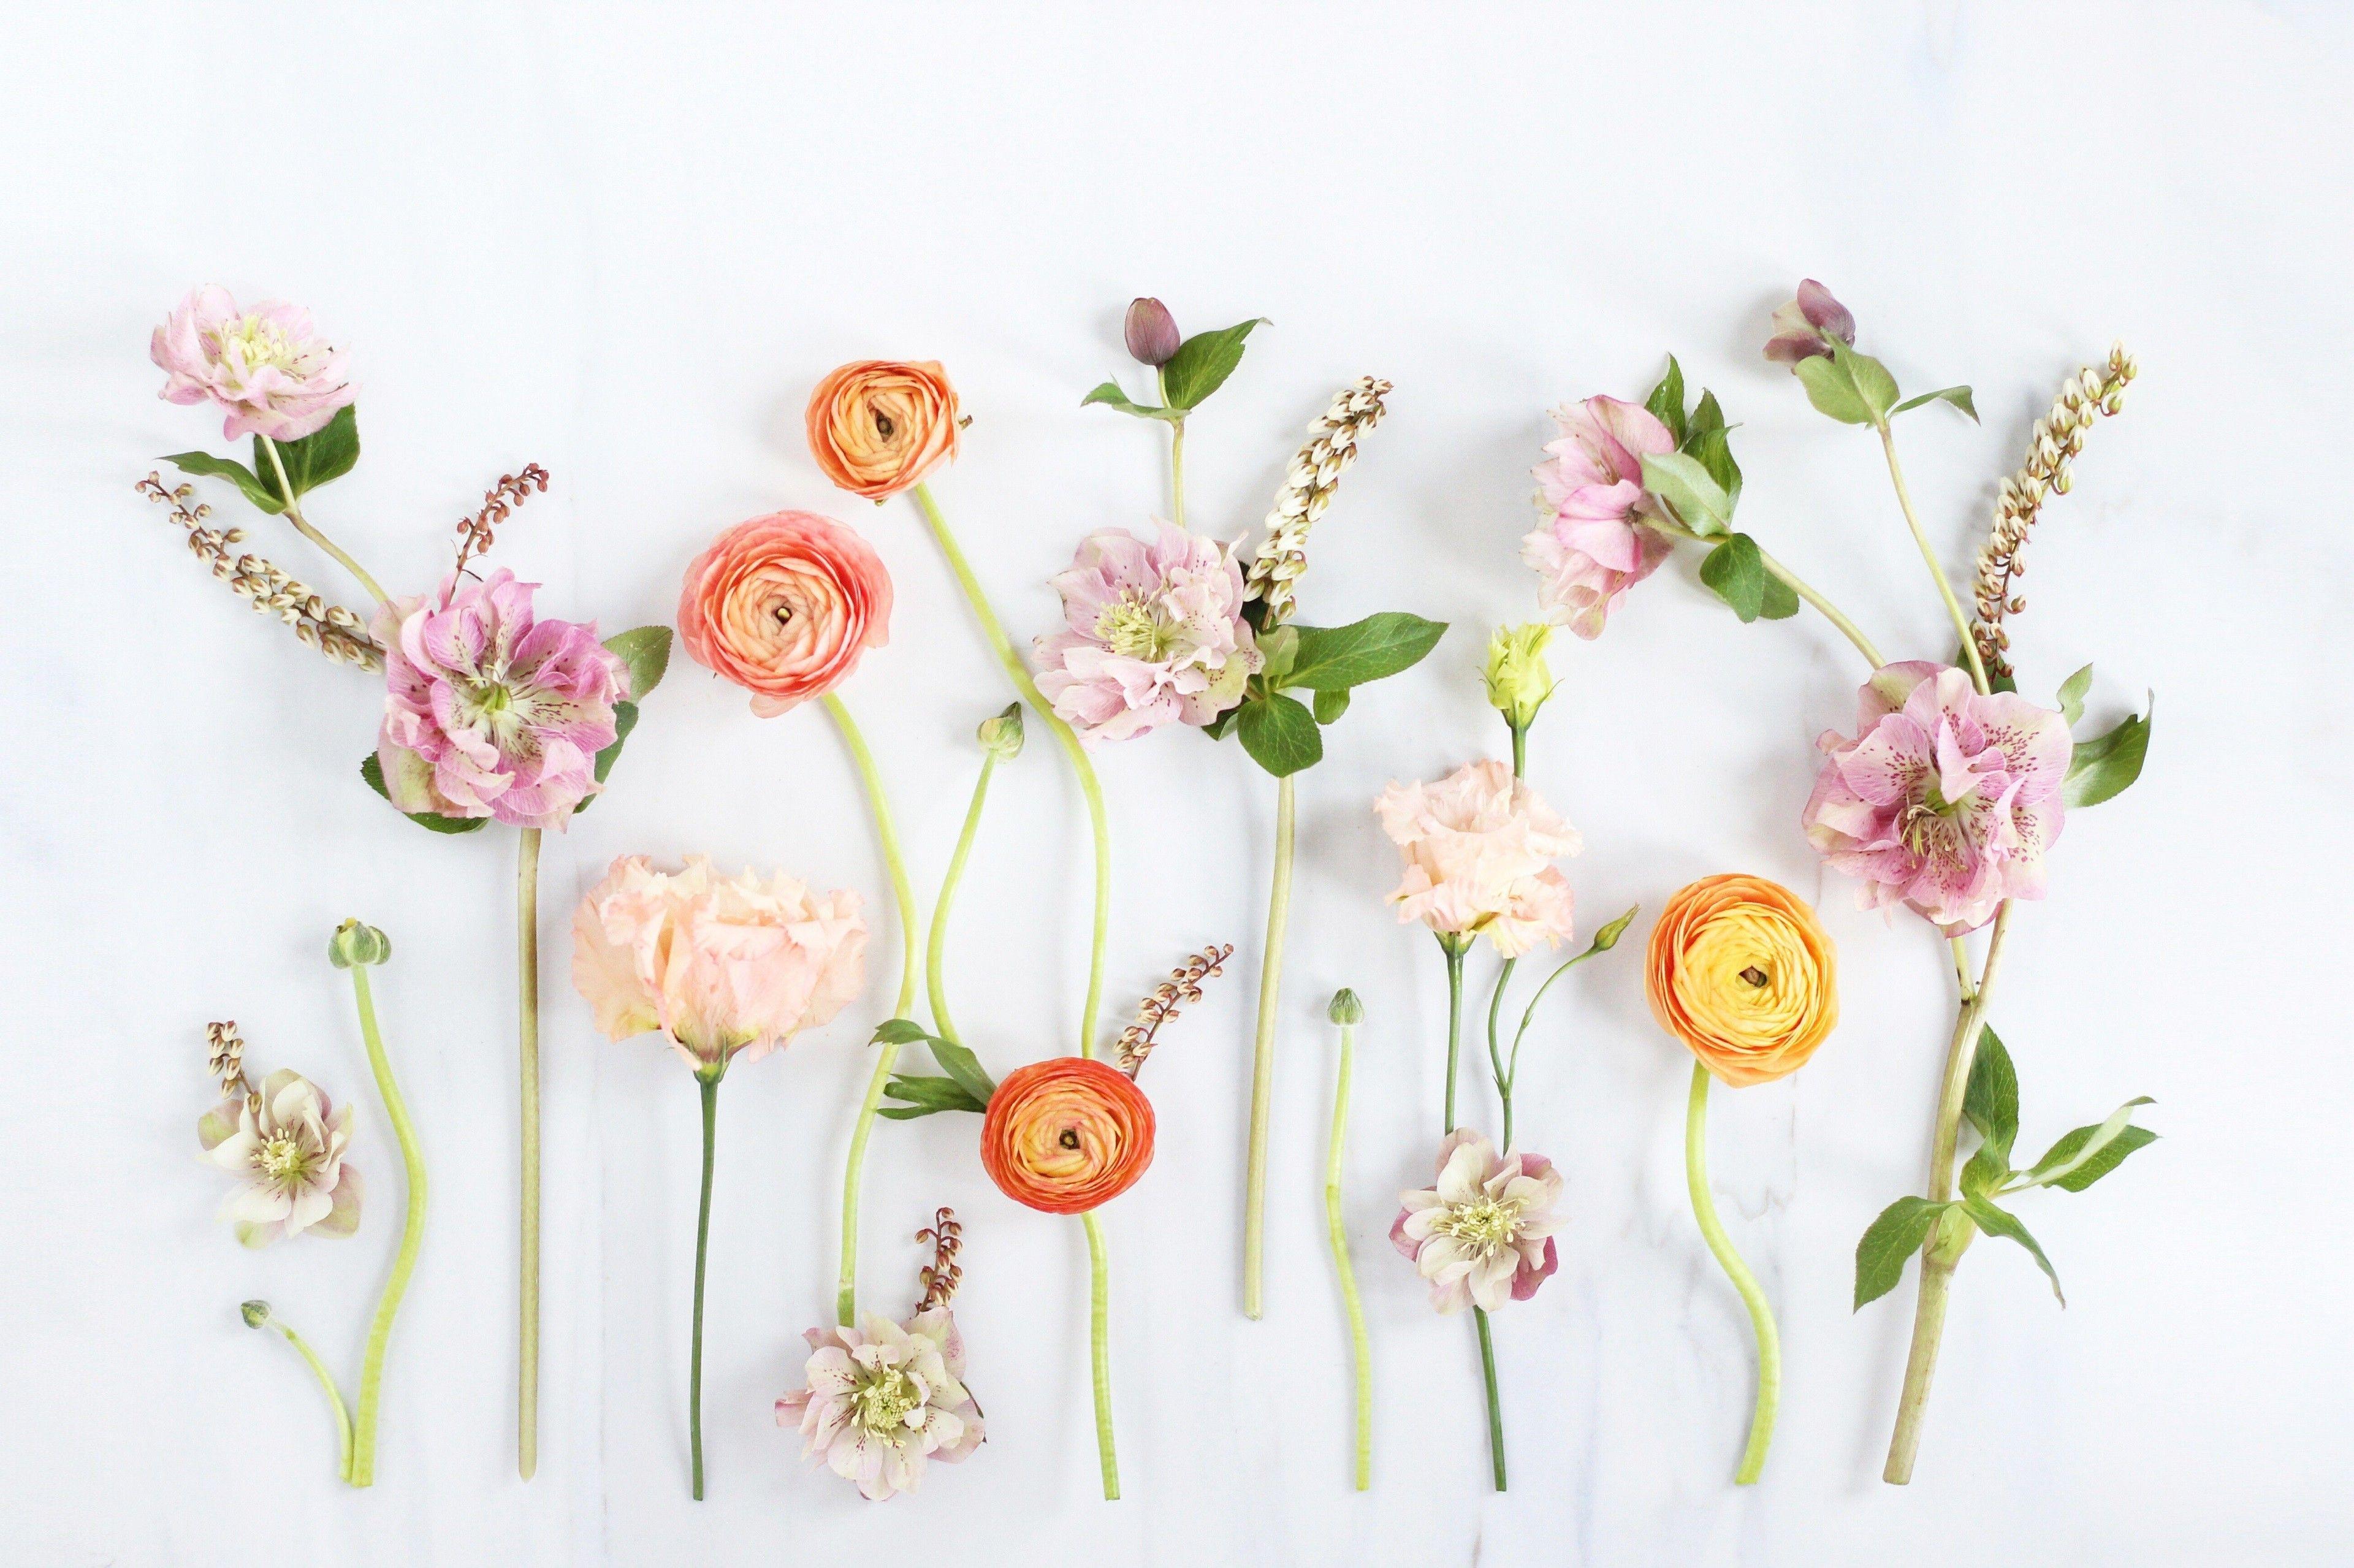 A beautiful arrangement of pink and orange flowers on a white background - Spring